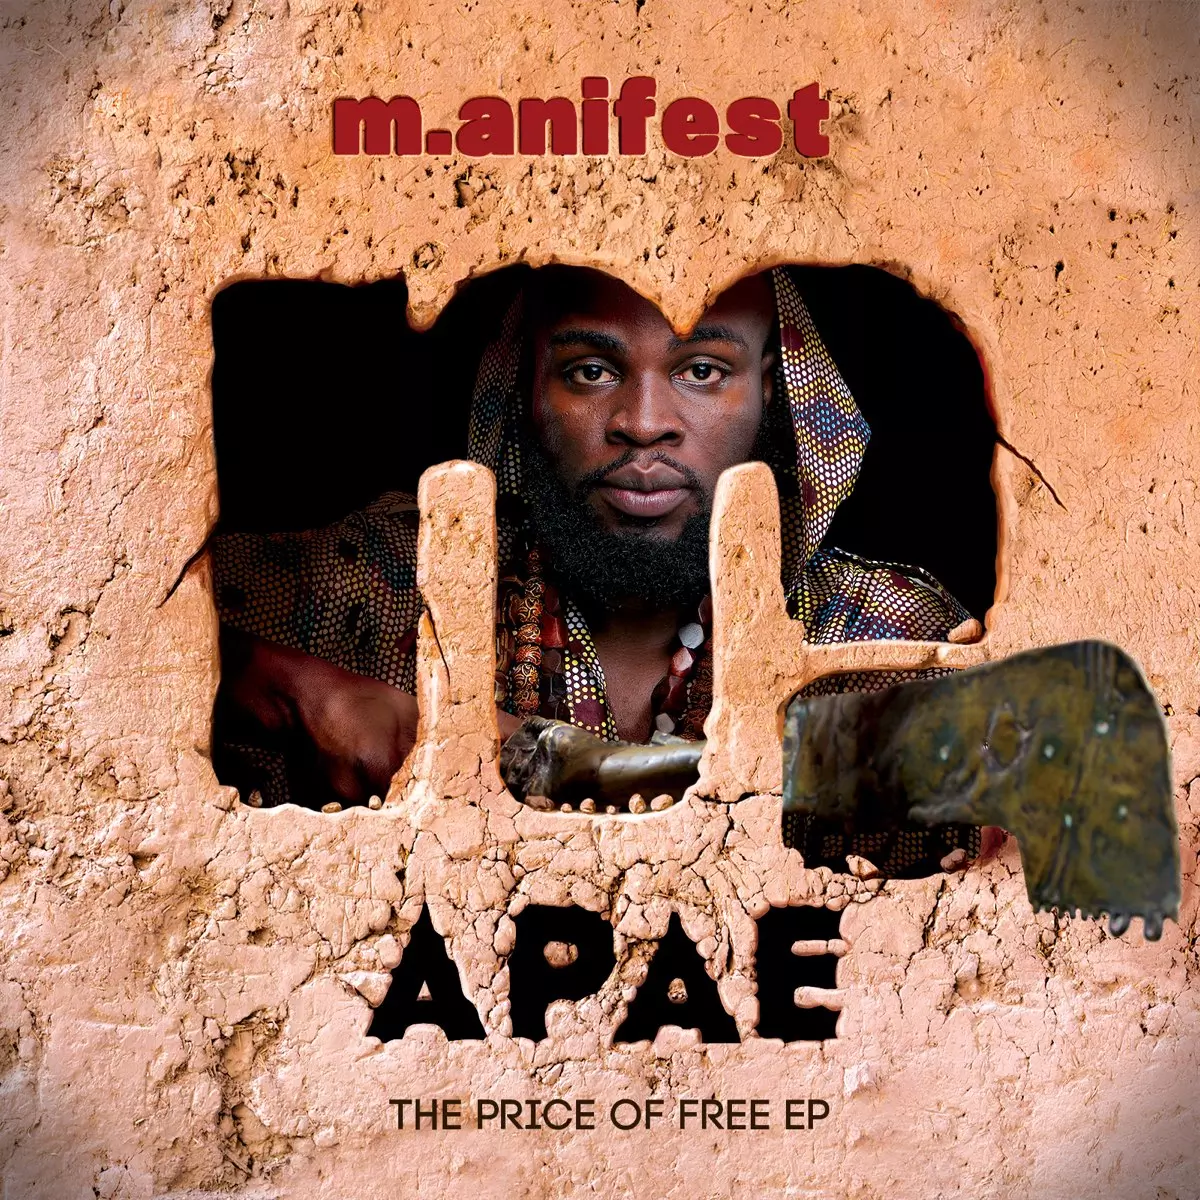 Apae: The Price of Free EP by M.anifest on Apple Music